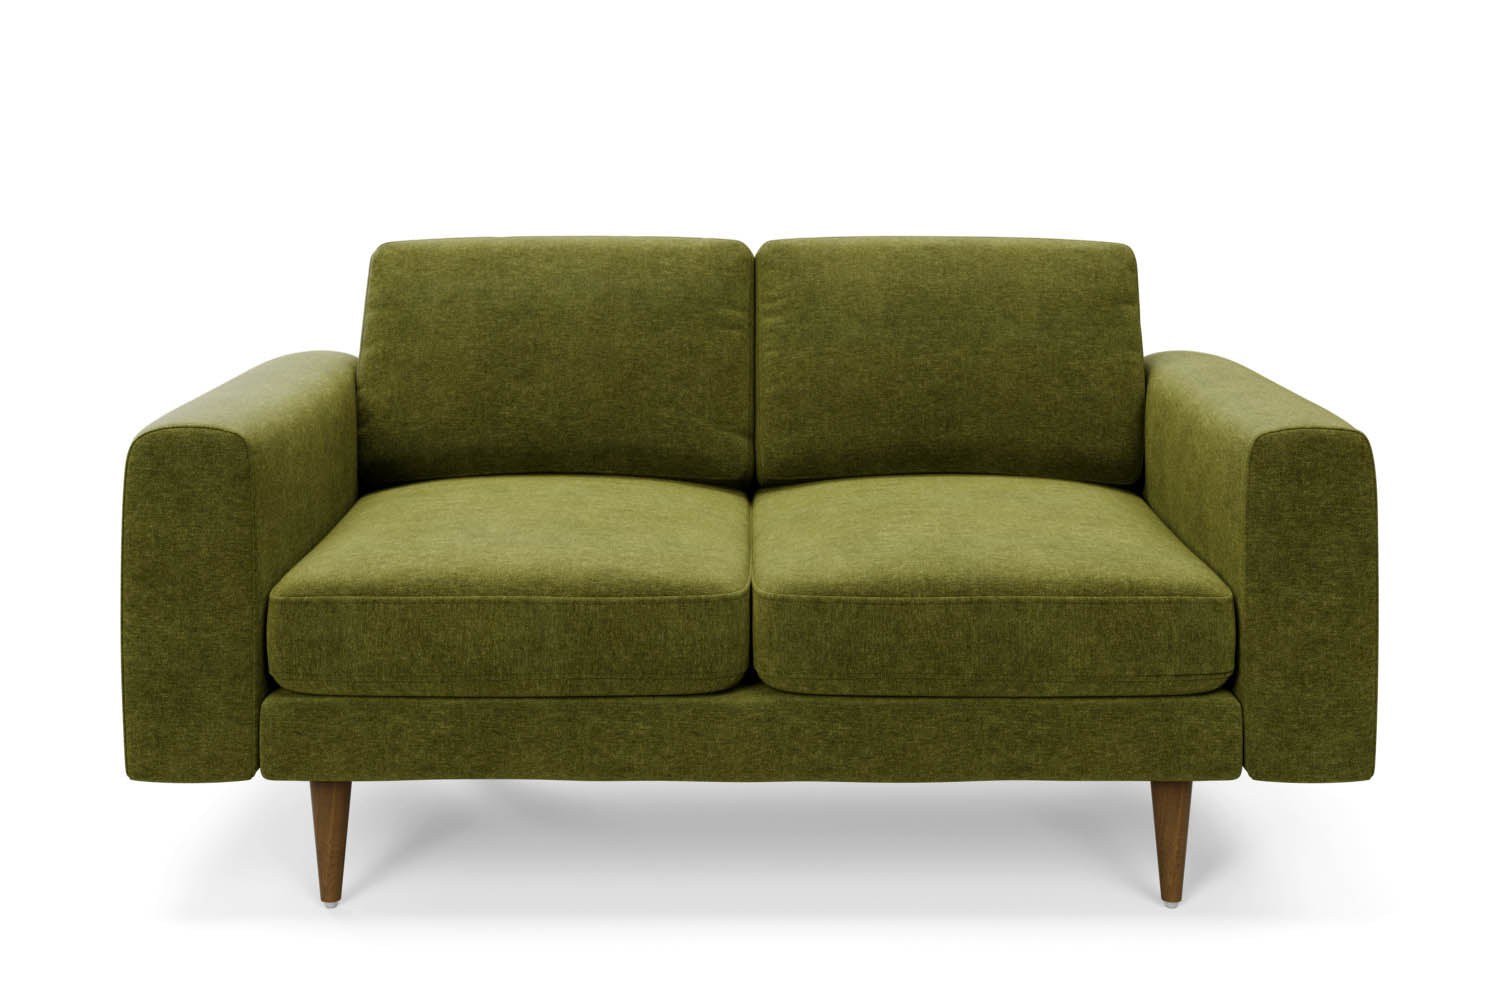 The Big Chill 2 Seater Sofa in Moss Chenille with brown legs front variant_40886287401008